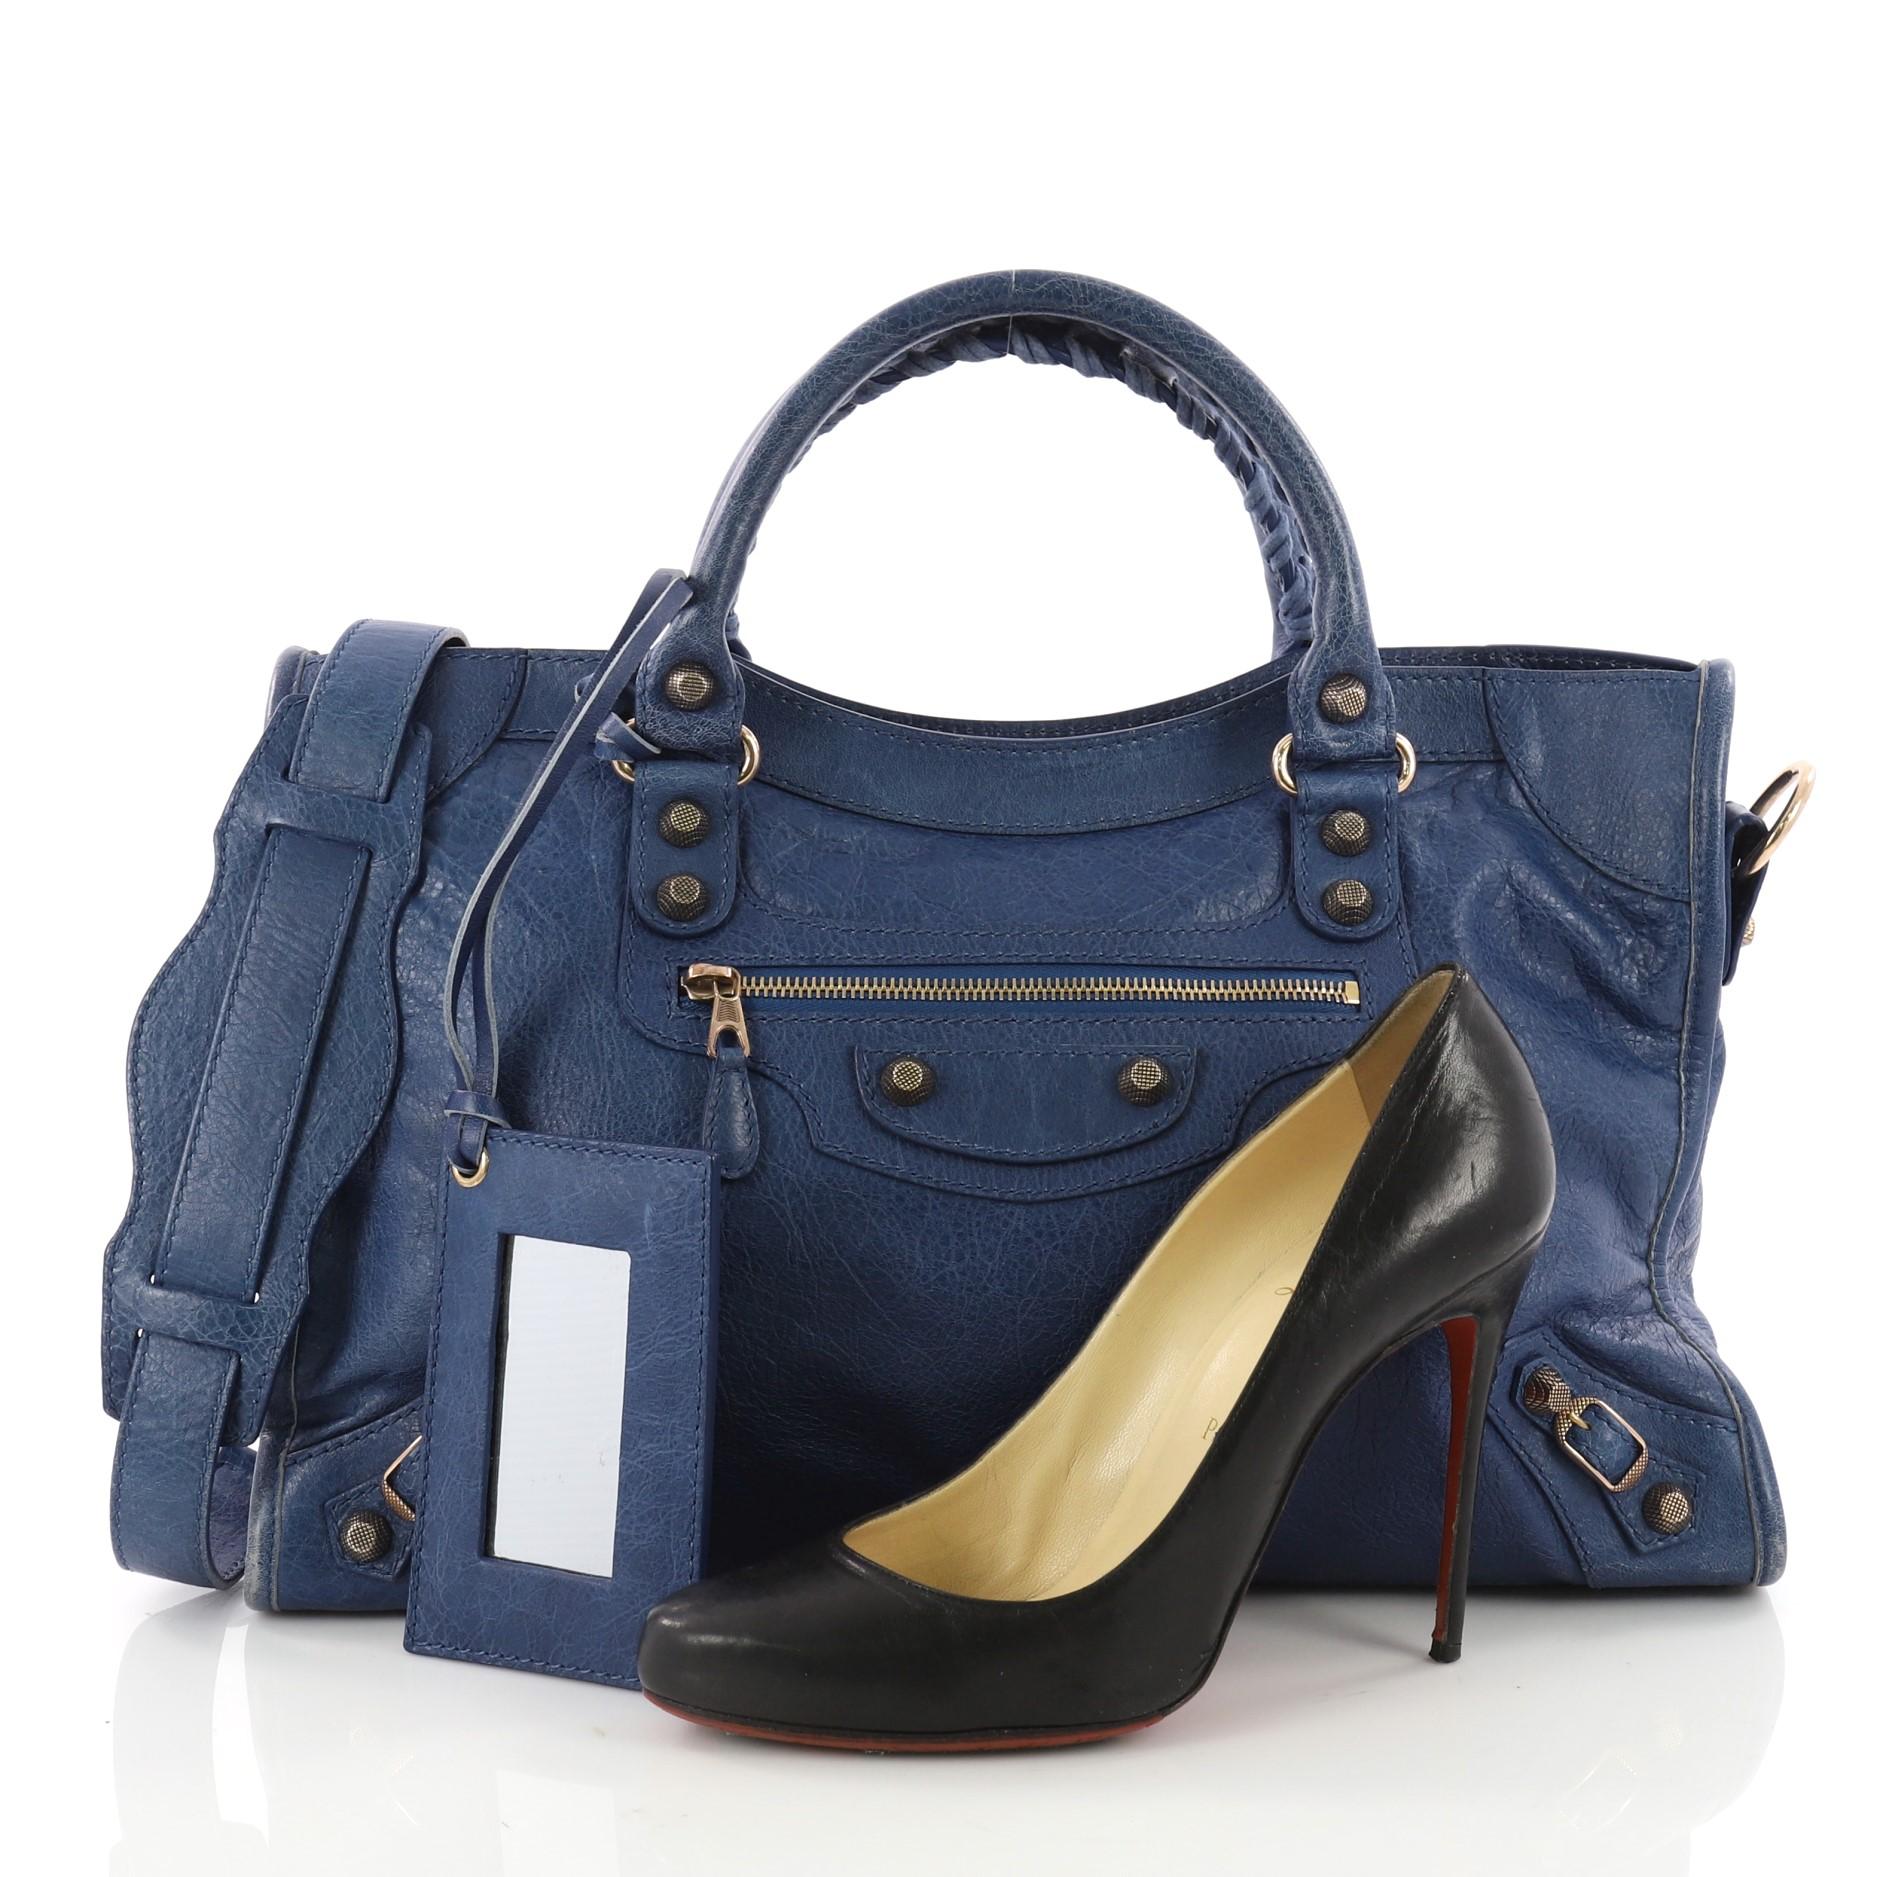 This authentic Balenciaga City Giant Studs Handbag Leather Medium is for the on-the-go fashionista. Constructed from blue leather, this popular bag features dual braided woven tall handles, exterior front zip pocket, iconic Balenciaga giant studs